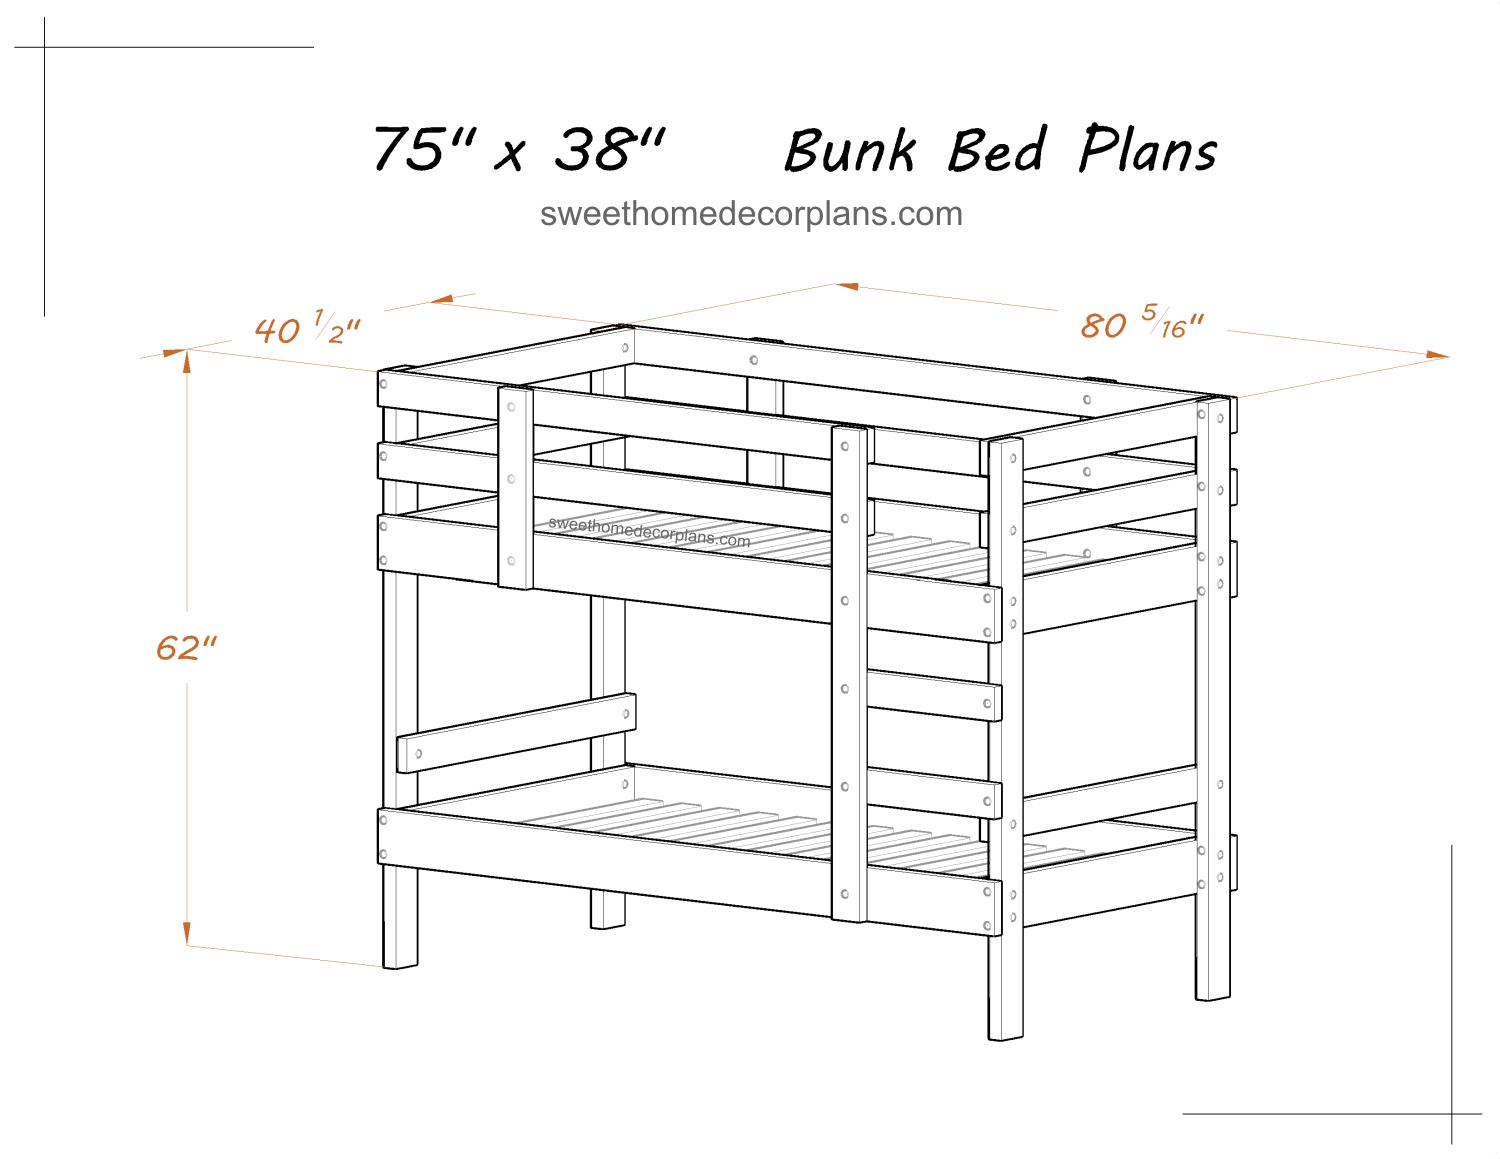 diy-wooden-75-x-38-bunk-bed-plans-in-pdf-for-kid